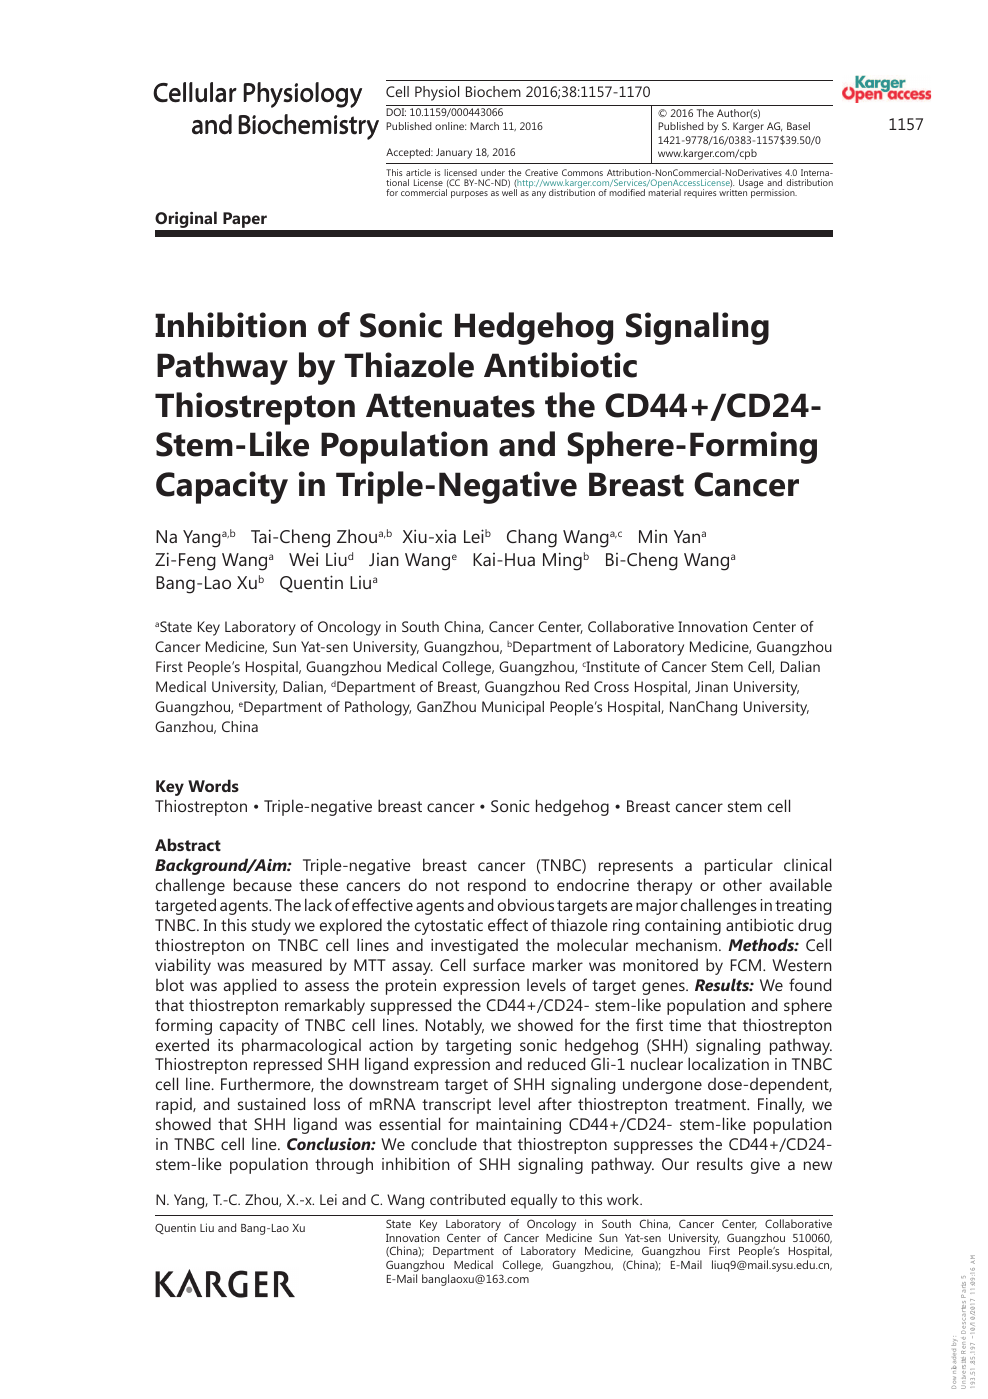 Inhibition Of Sonic Hedgehog Signaling Pathway By Thiazole Antibiotic Thiostrepton Attenuates The Cd44 Cd24 Stem Like Population And Sphere Forming Capacity In Triple Negative Breast Cancer Topic Of Research Paper In Biological Sciences Download